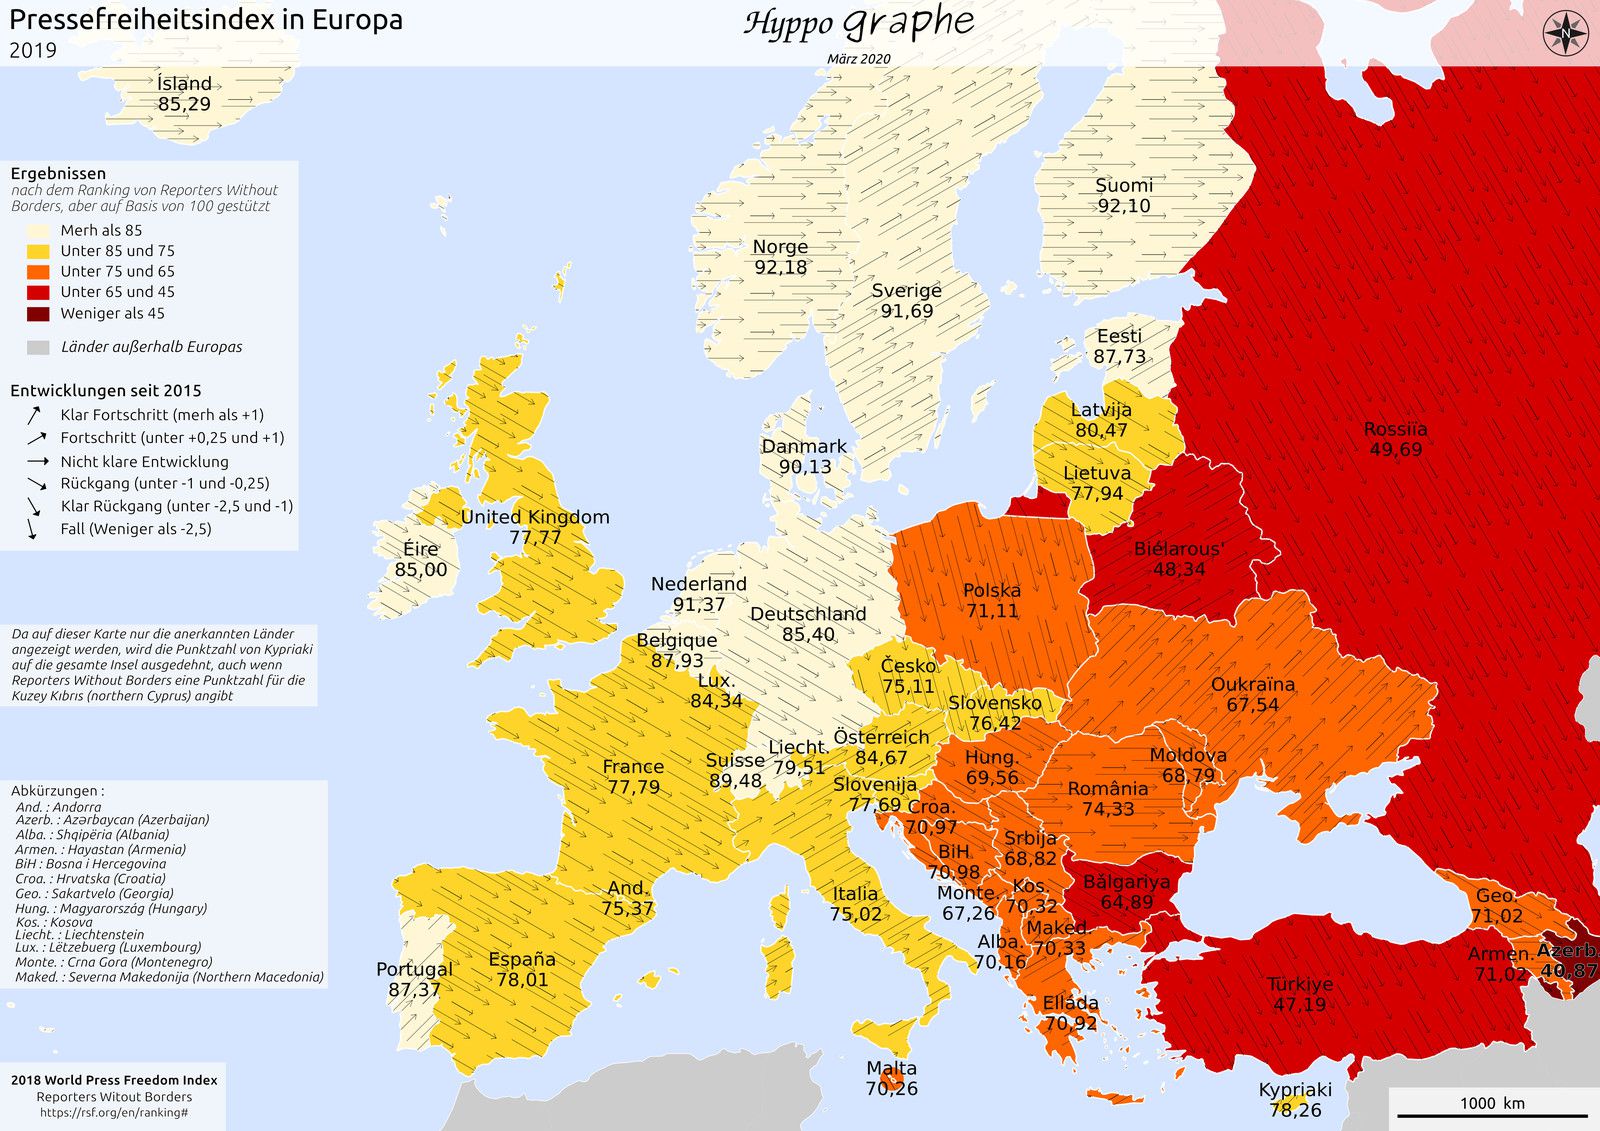 Index of Press Freedom in Europe | 2019